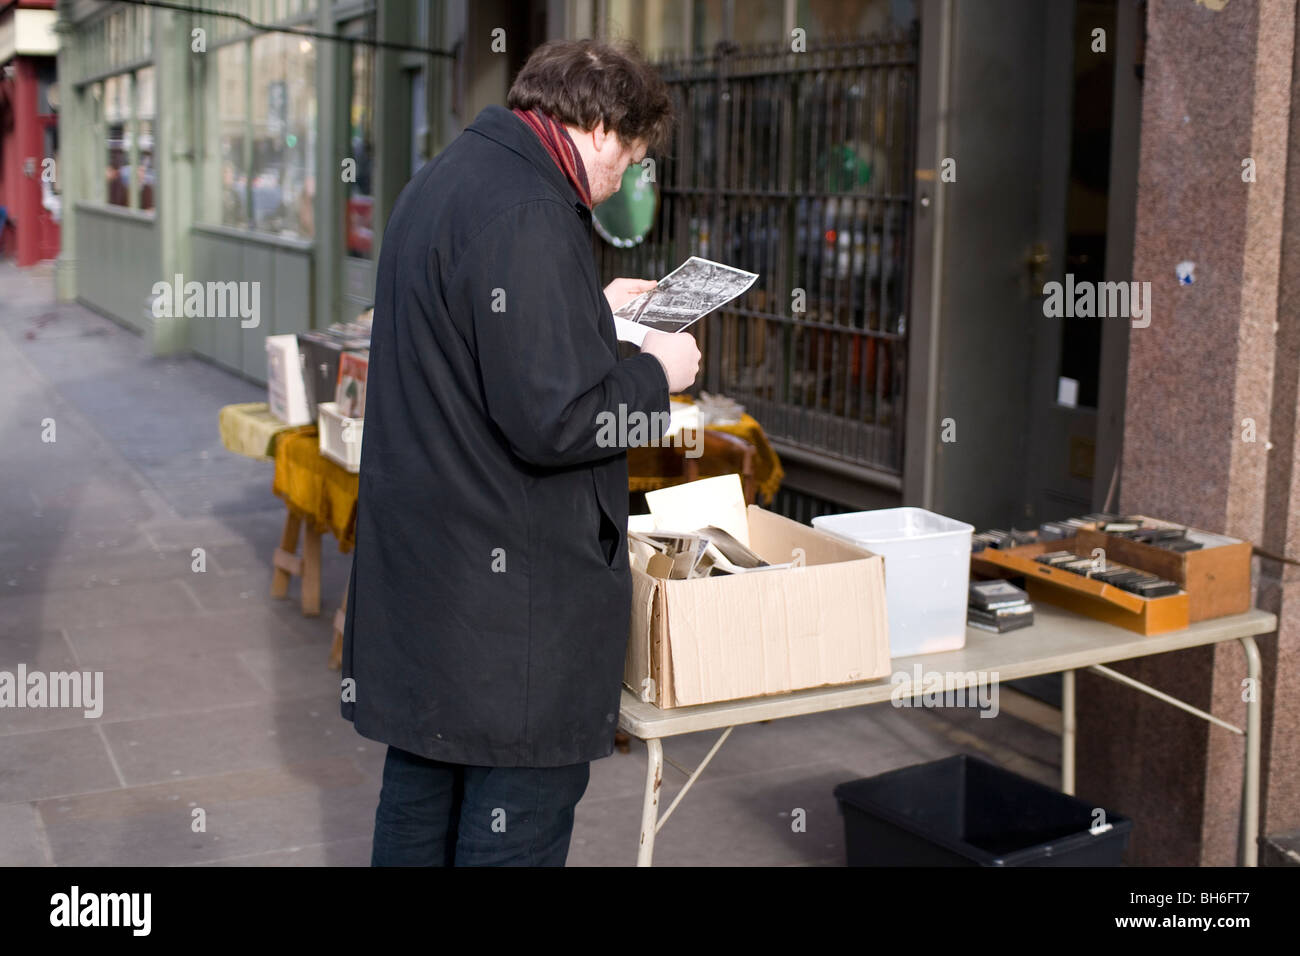 A man examines a piece of ephemera at a stall in London's Commercial St, E1 Stock Photo